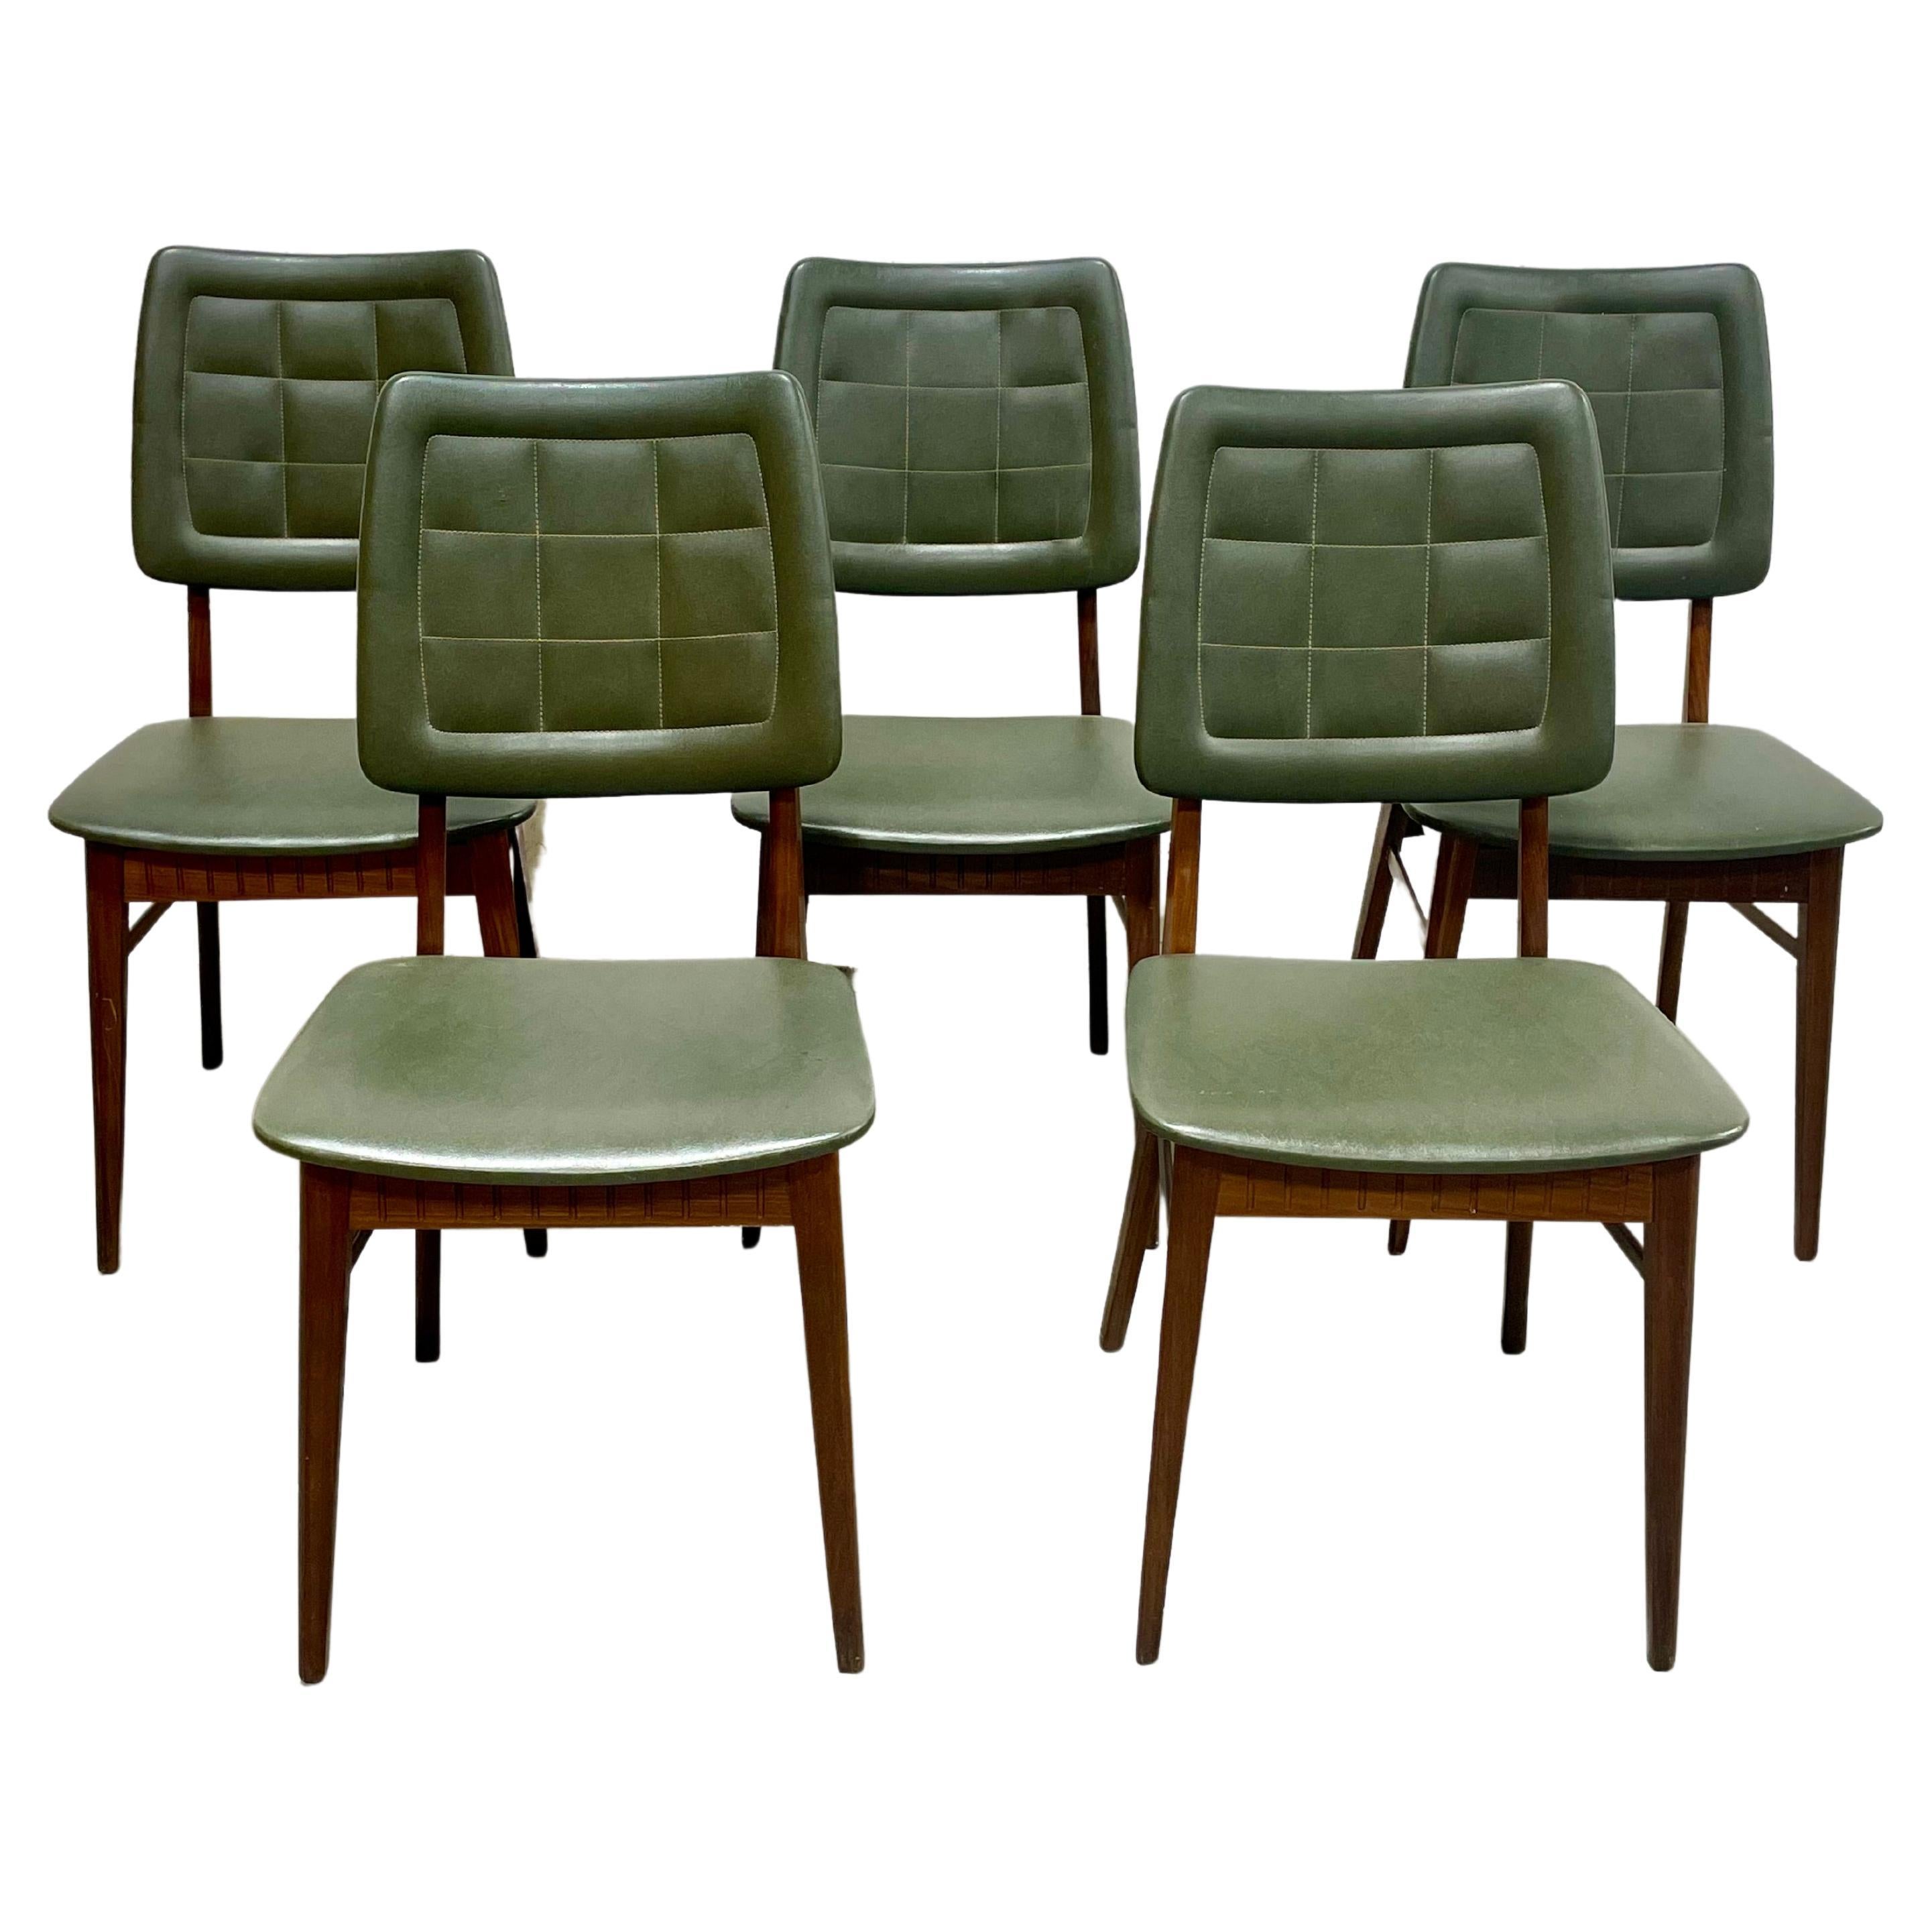 Set of Five Mid Century Modern Teak Danish Dining Chairs, Made in Denmark, c. 1960's.   The stunning teak wood features incredible wood grains and they have all been freshly cleaned and oiled. The chairs are upholstered in hunter green naugahyde and